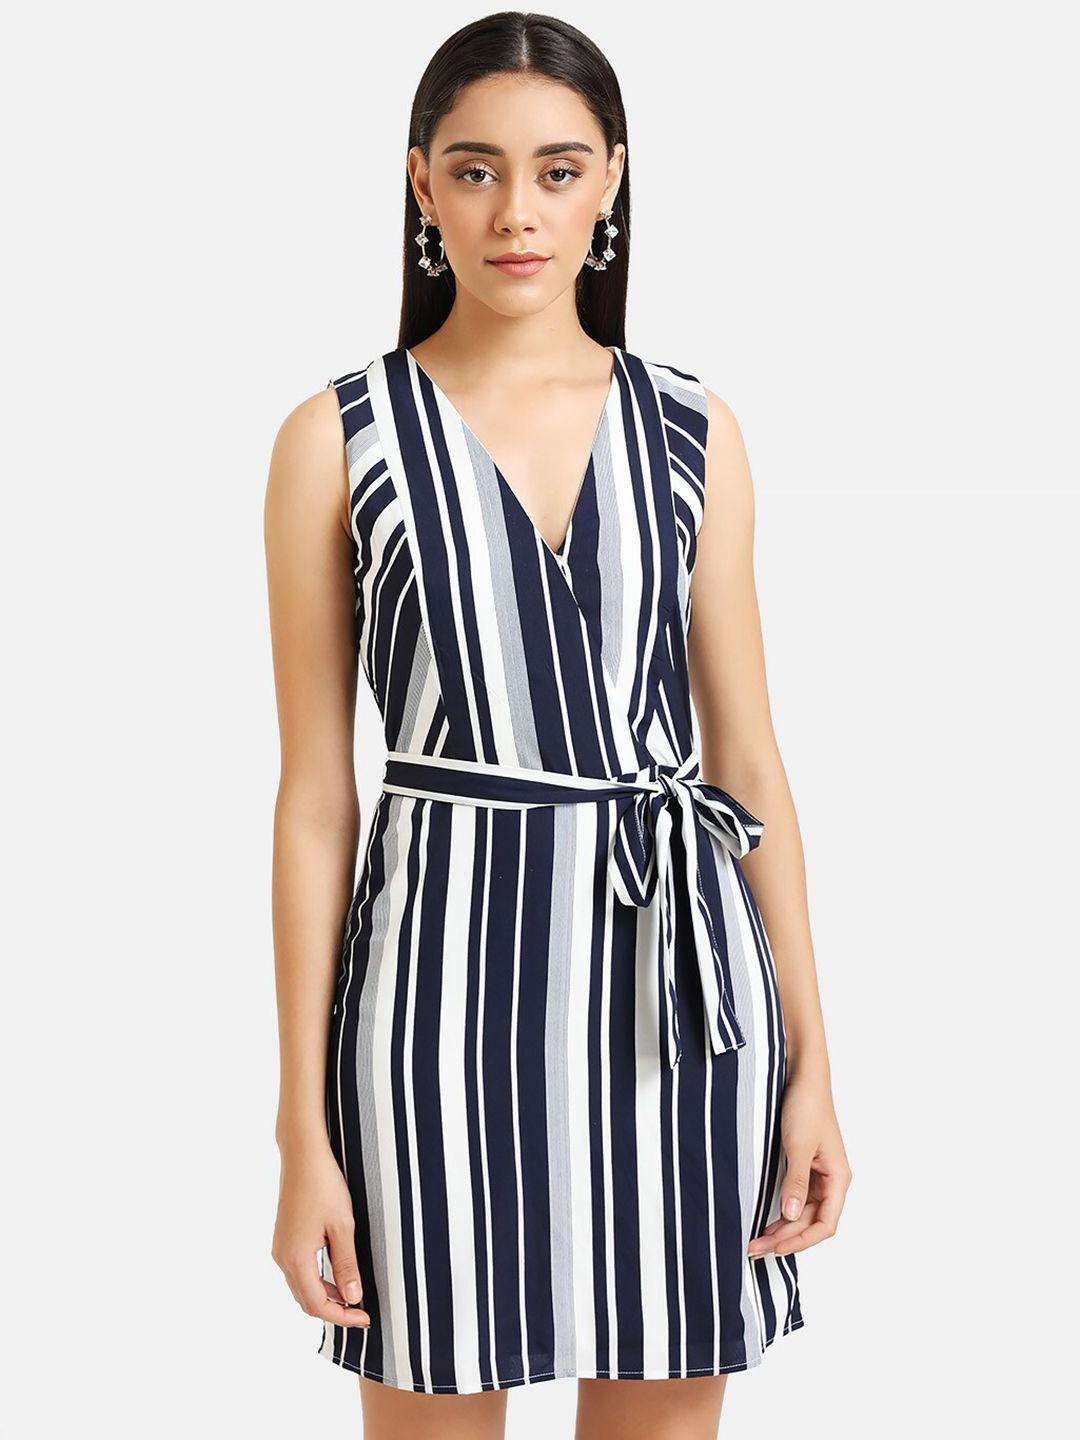 kazo women navy blue & white striped fit and flare dress